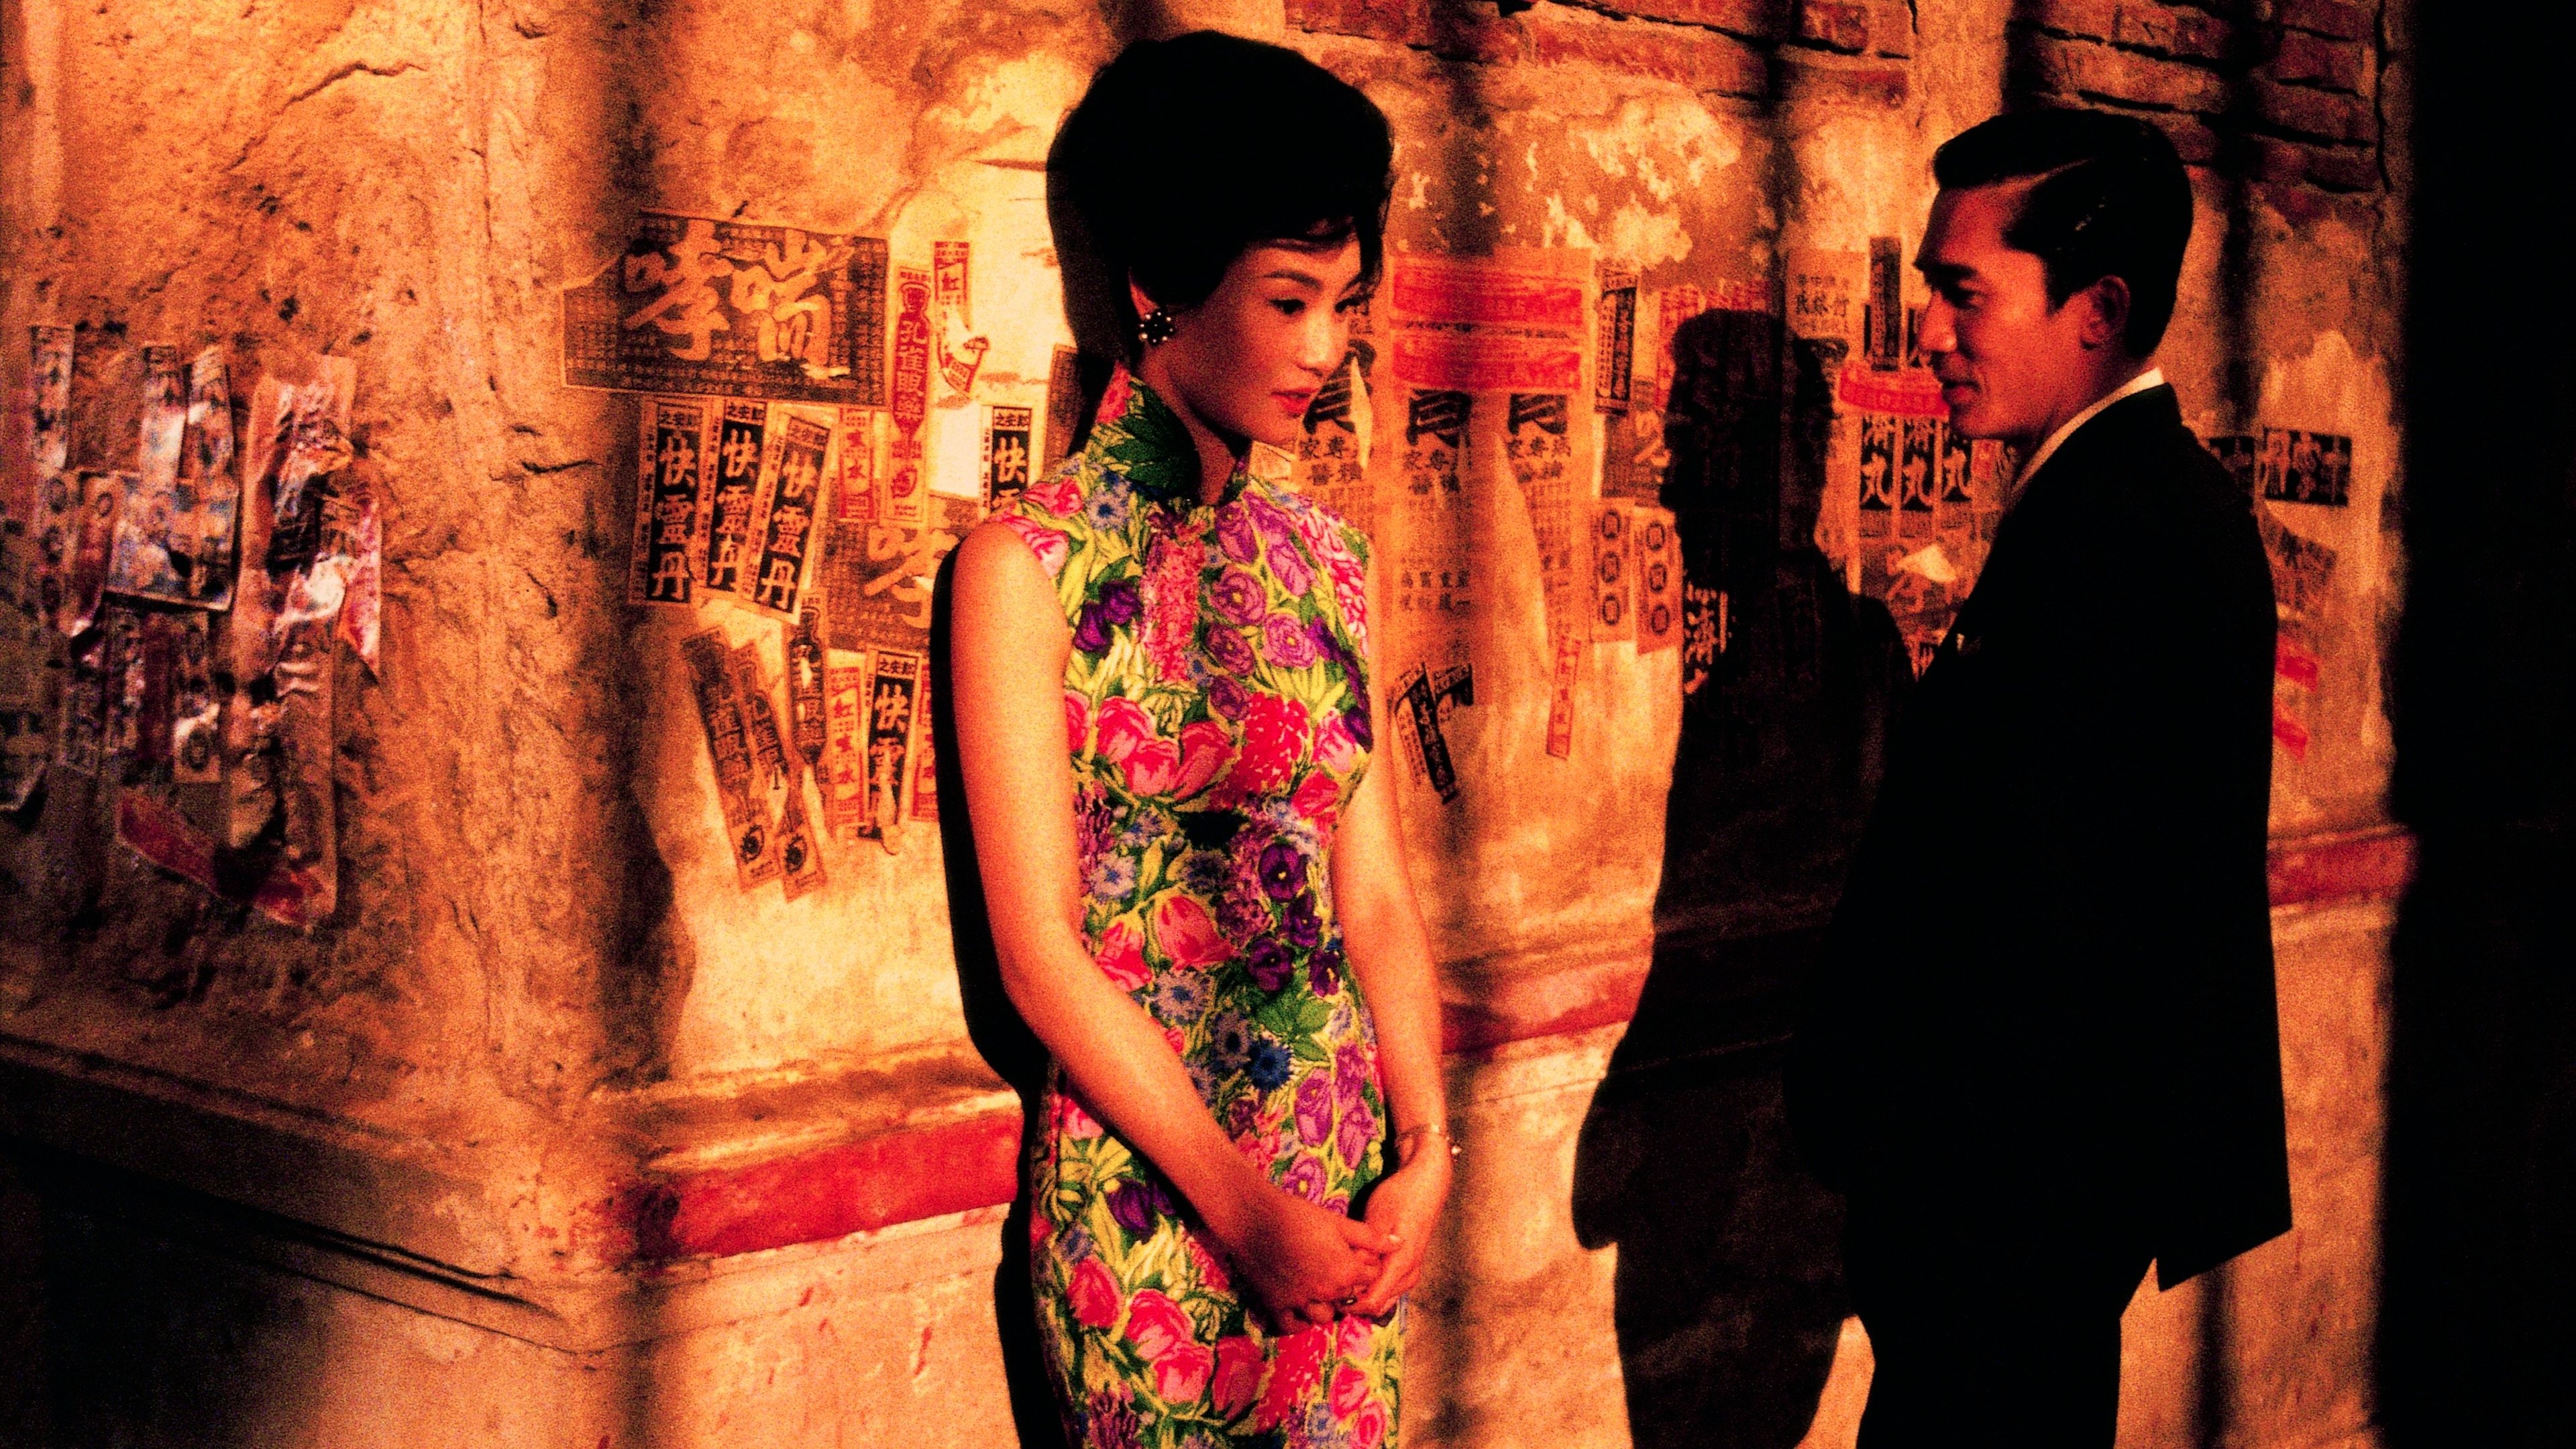 Maggie Cheung and Tony Leung in a still from “In the Mood for Love”. Photo: SCMP 